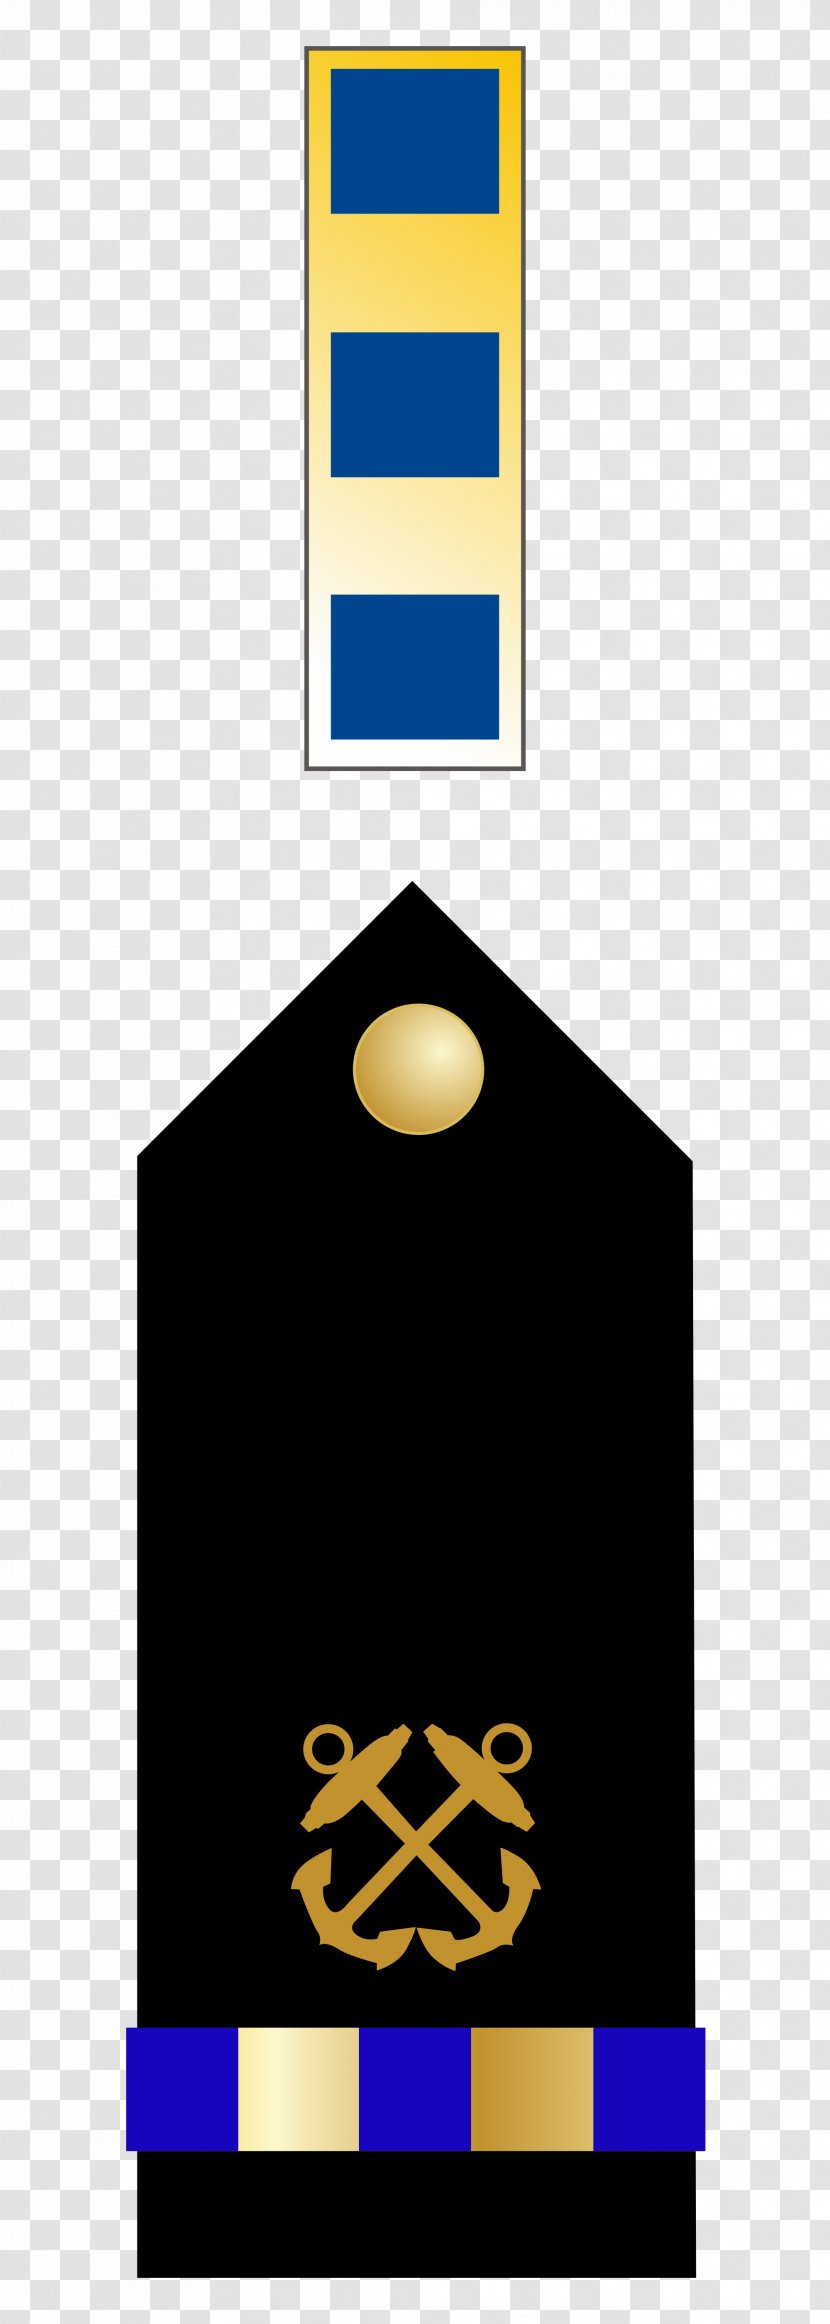 Chief Warrant Officer United States Navy Army Military Rank - Warranty Transparent PNG